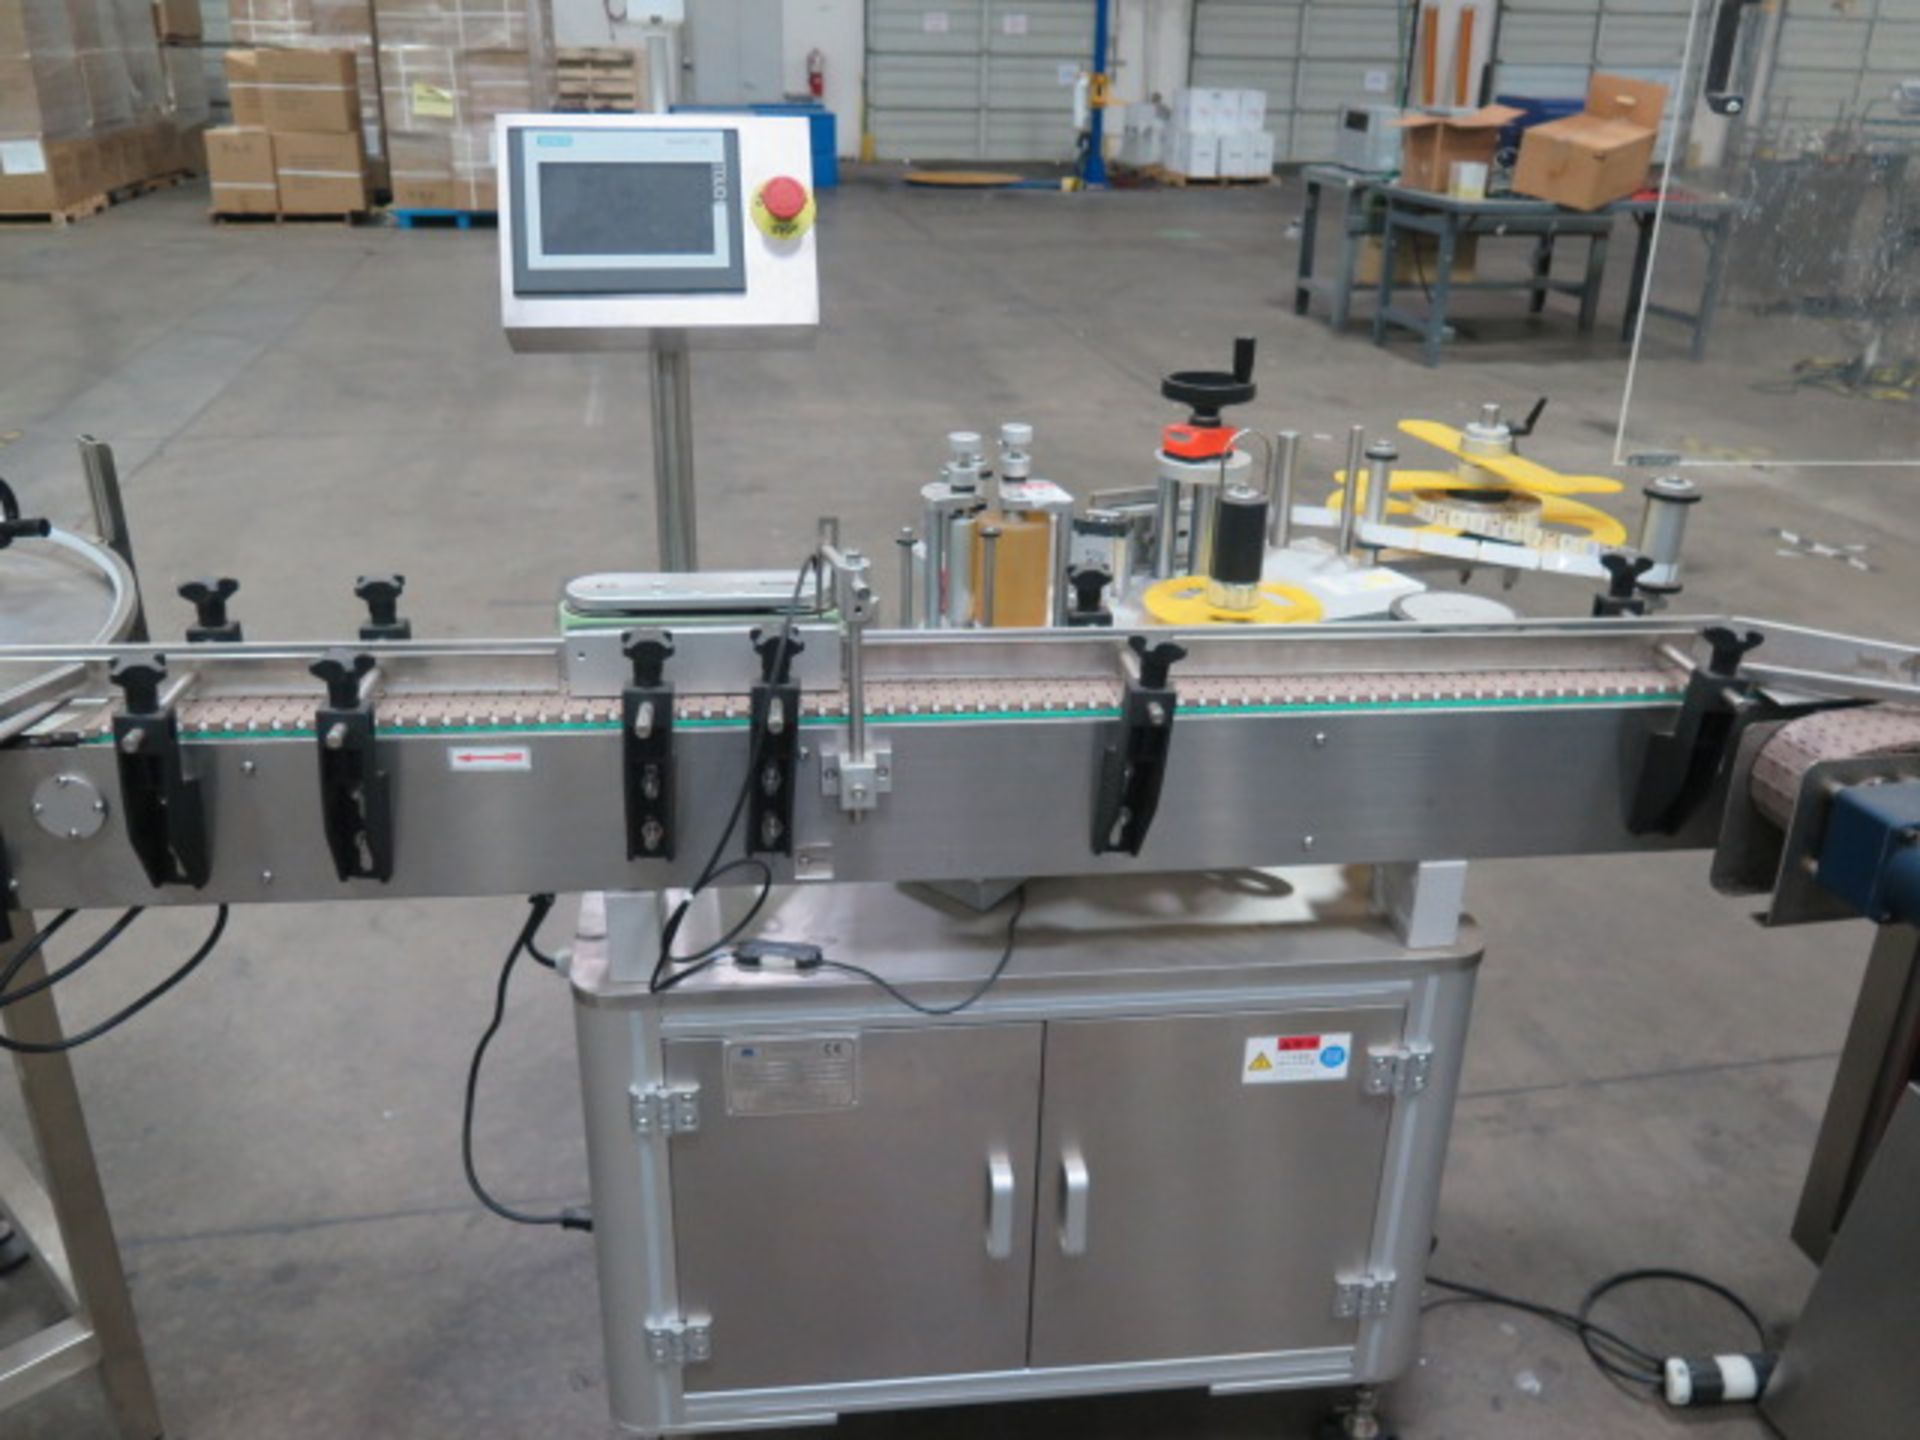 Line 4 : 2020 MIC Filling and Capping Line w/ Siemens “Smart Line” PLC Controls, SOLD AS IS - Image 17 of 27